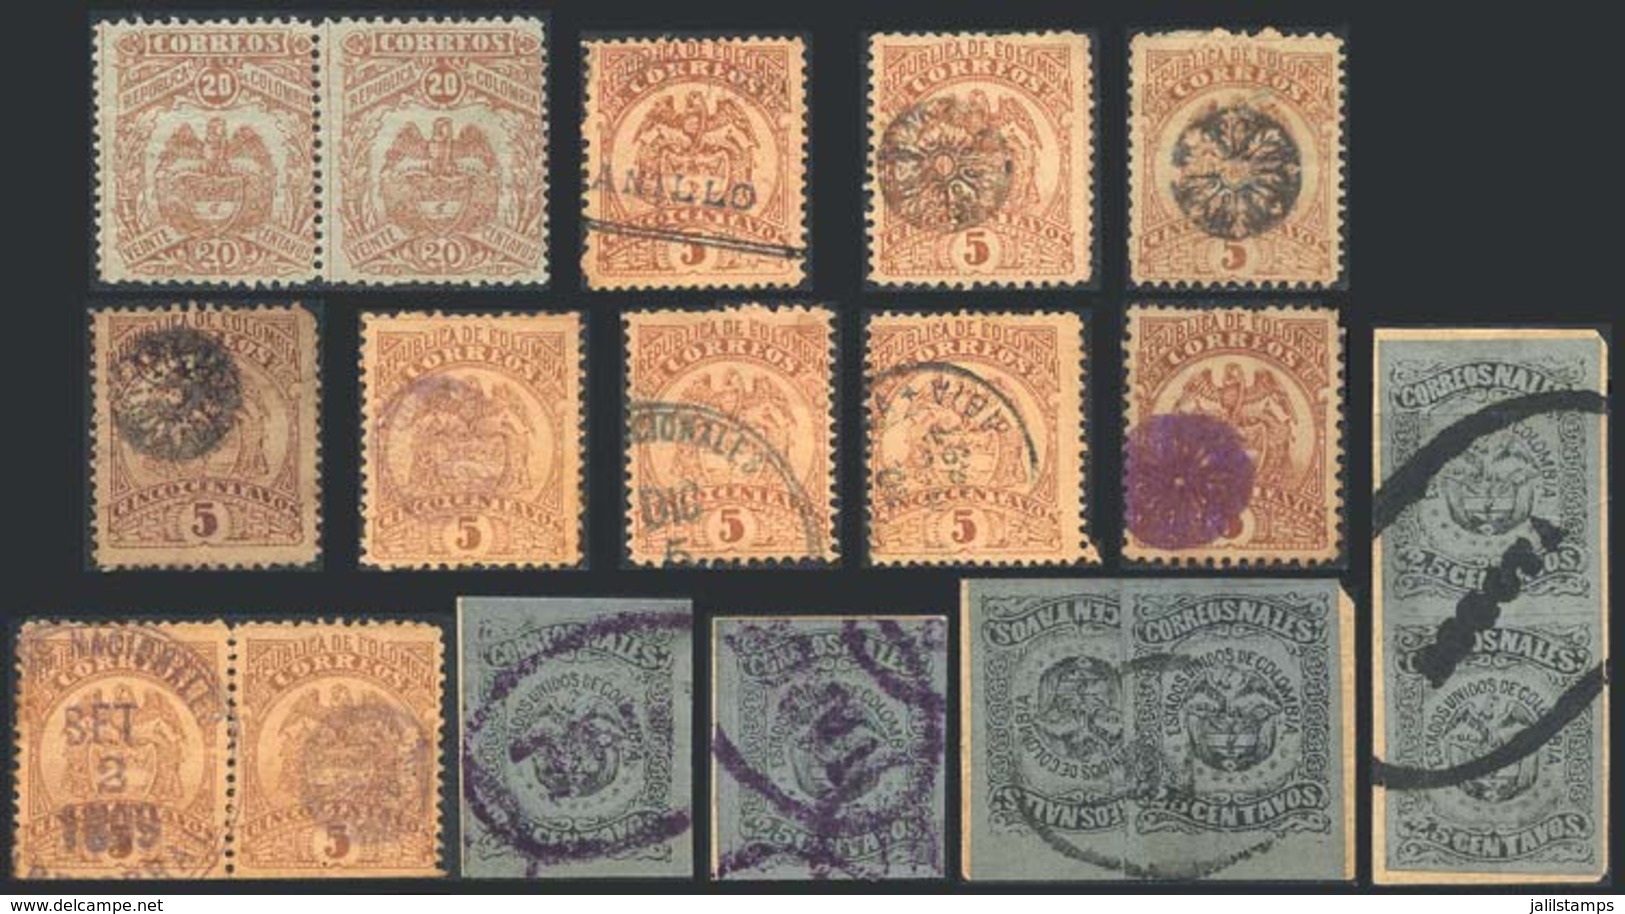 COLOMBIA: Lot Of Old Stamps, All Of Very Fine Quality, Good Opportunity At LOW START! - Colombie